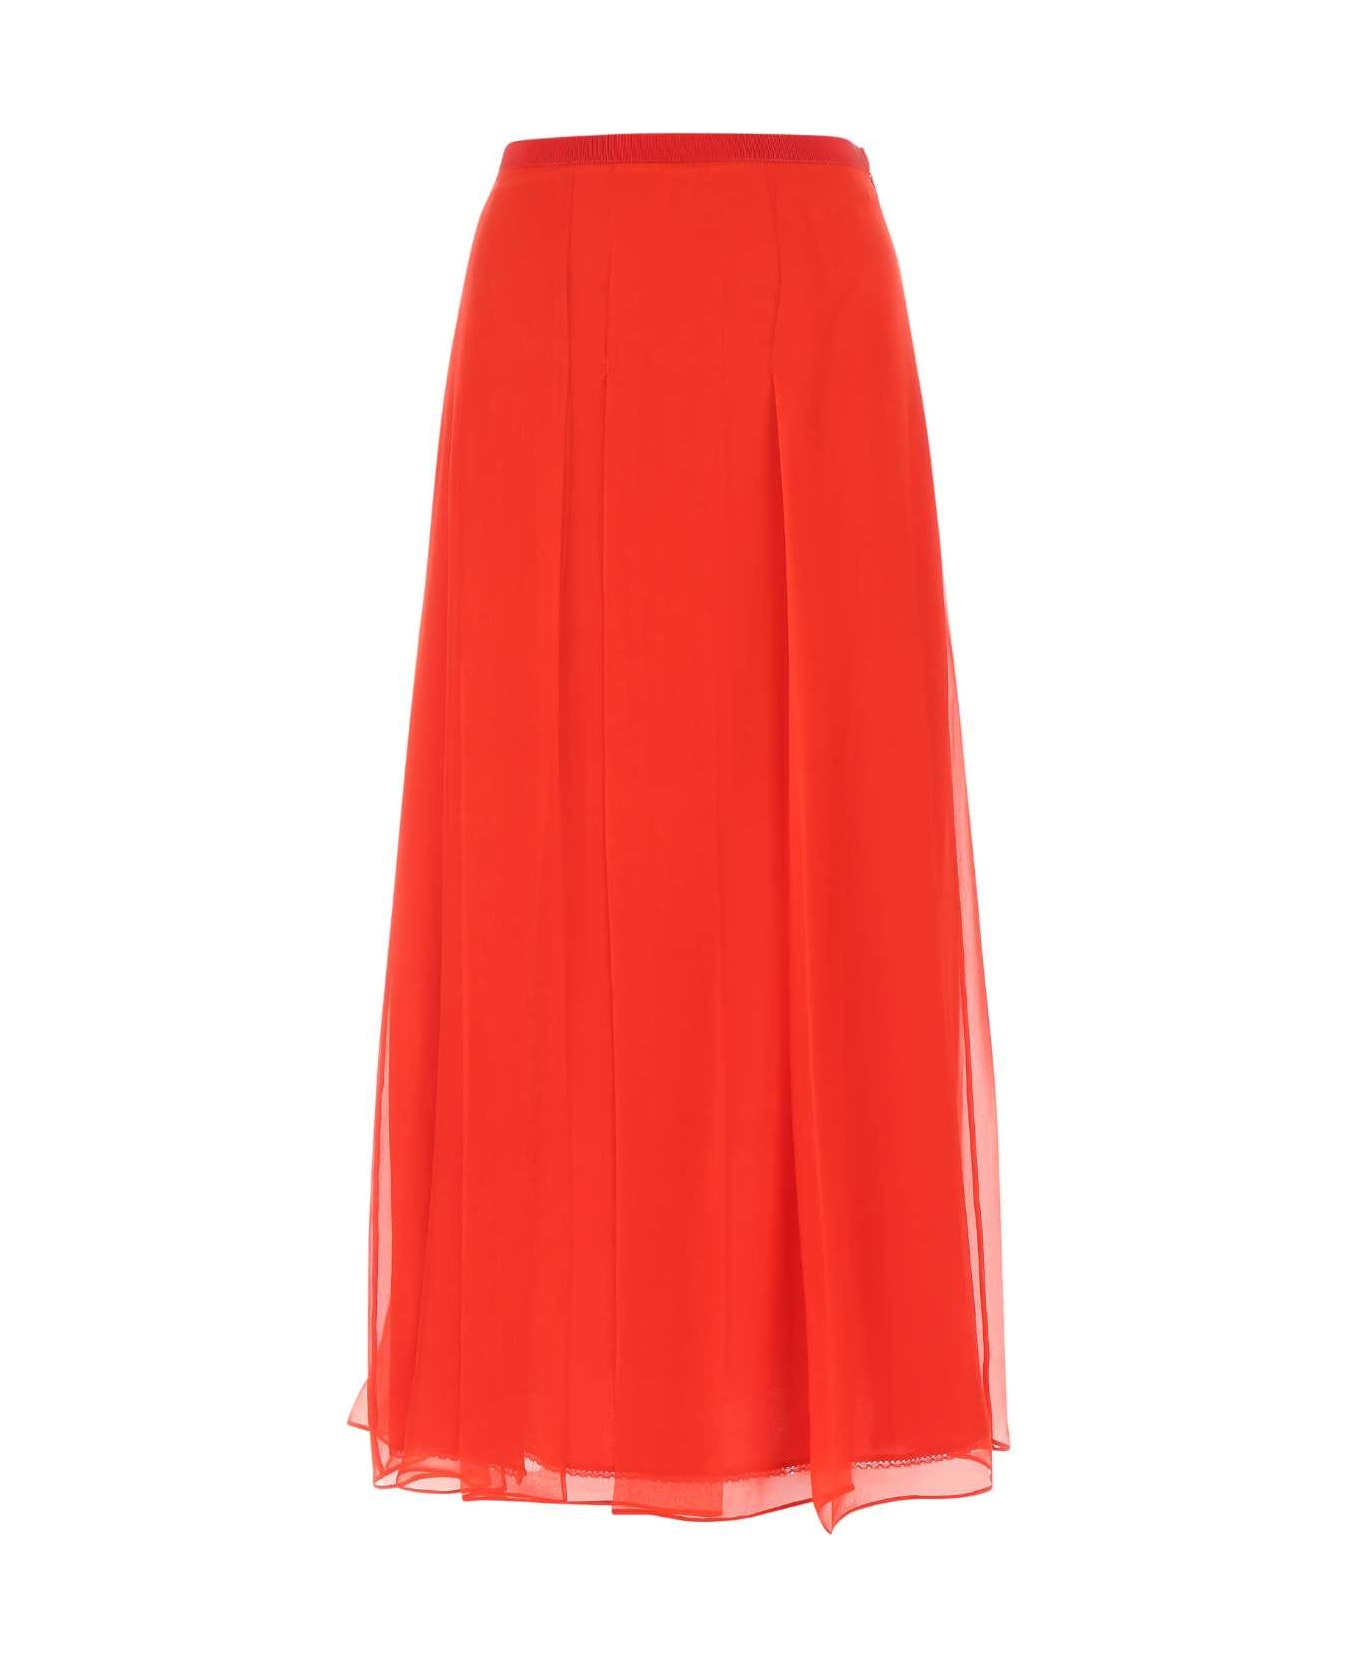 Gucci Red Voile Skirt - 6490